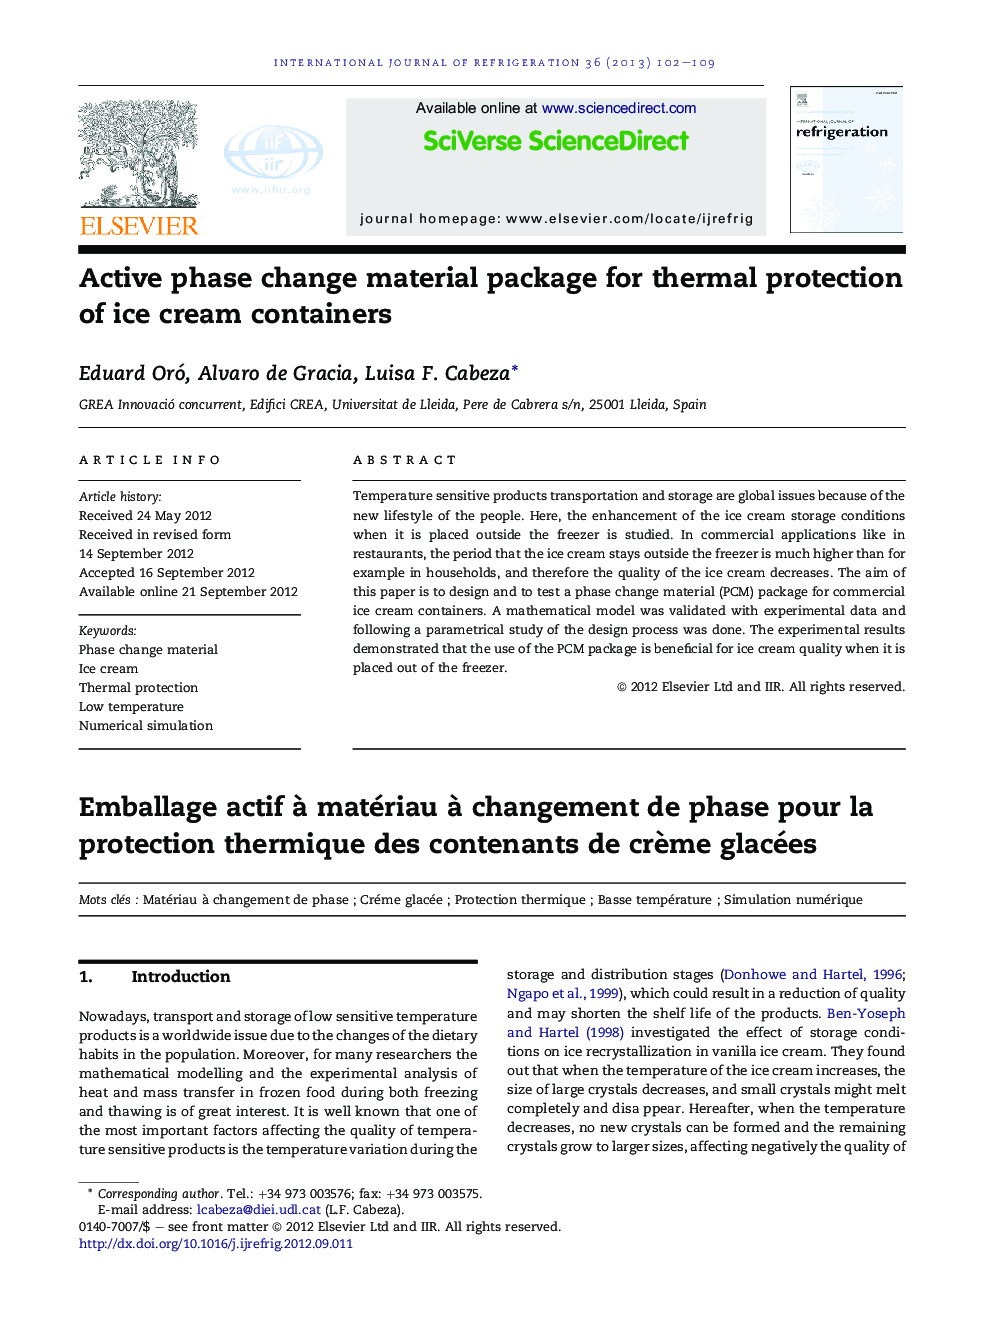 Active phase change material package for thermal protection of ice cream containers